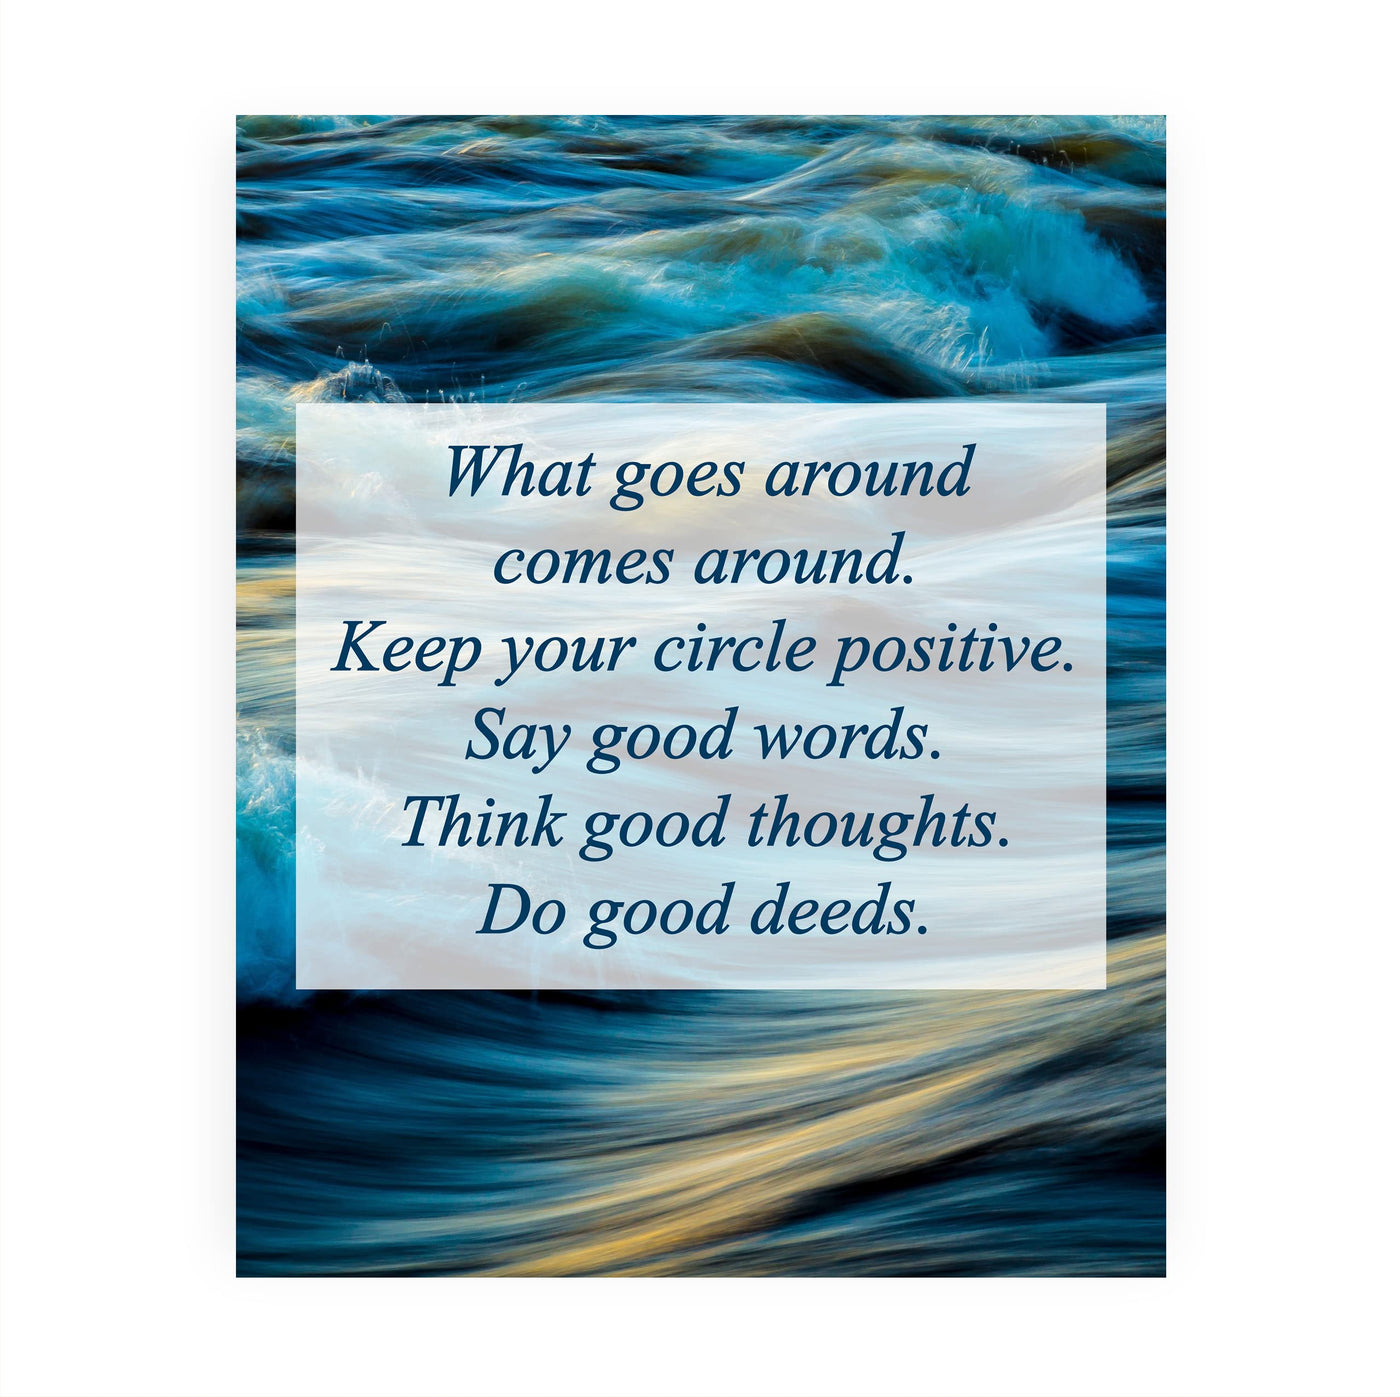 Think Good Thoughts-Do Good Deeds-Inspirational Quotes Wall Art -10 x 8" Typographic Ocean Wave Print -Ready to Frame. Motivational Home-Office-School-Beach House Decor. Great Reminder to Be Kind!